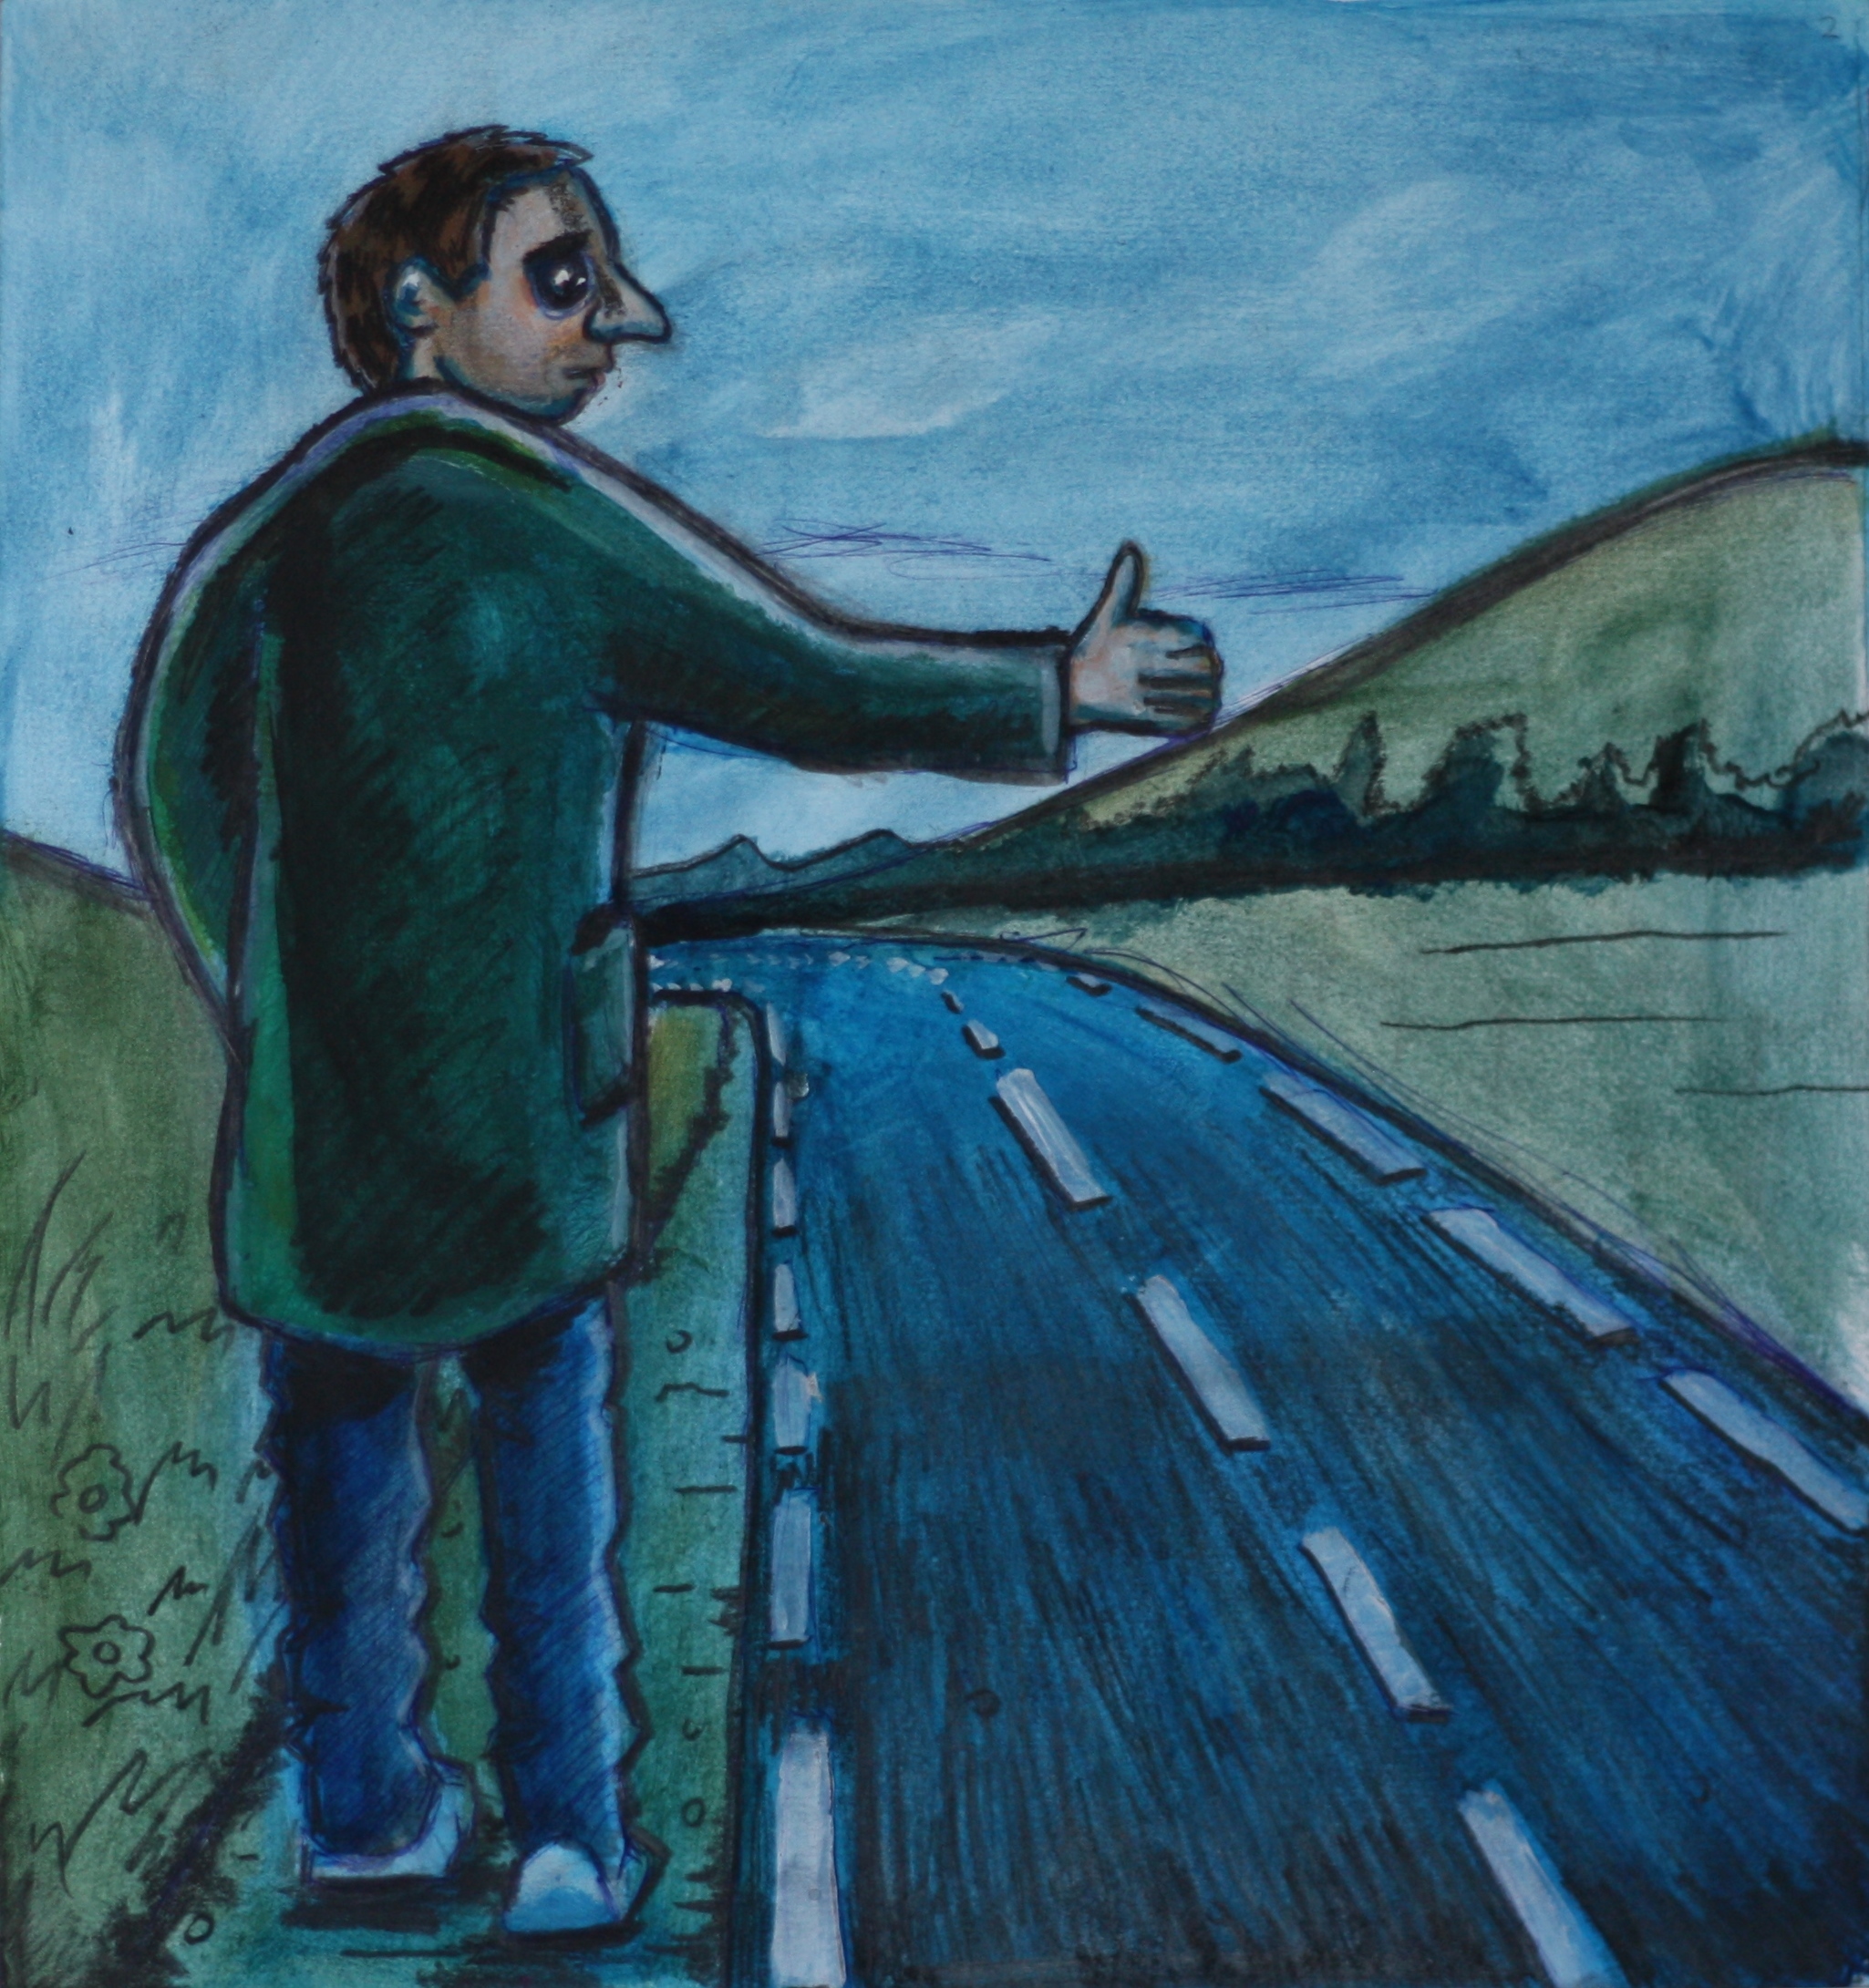 illustrations for 'The Hitchhiker' | oSiAn gRiFfOrD